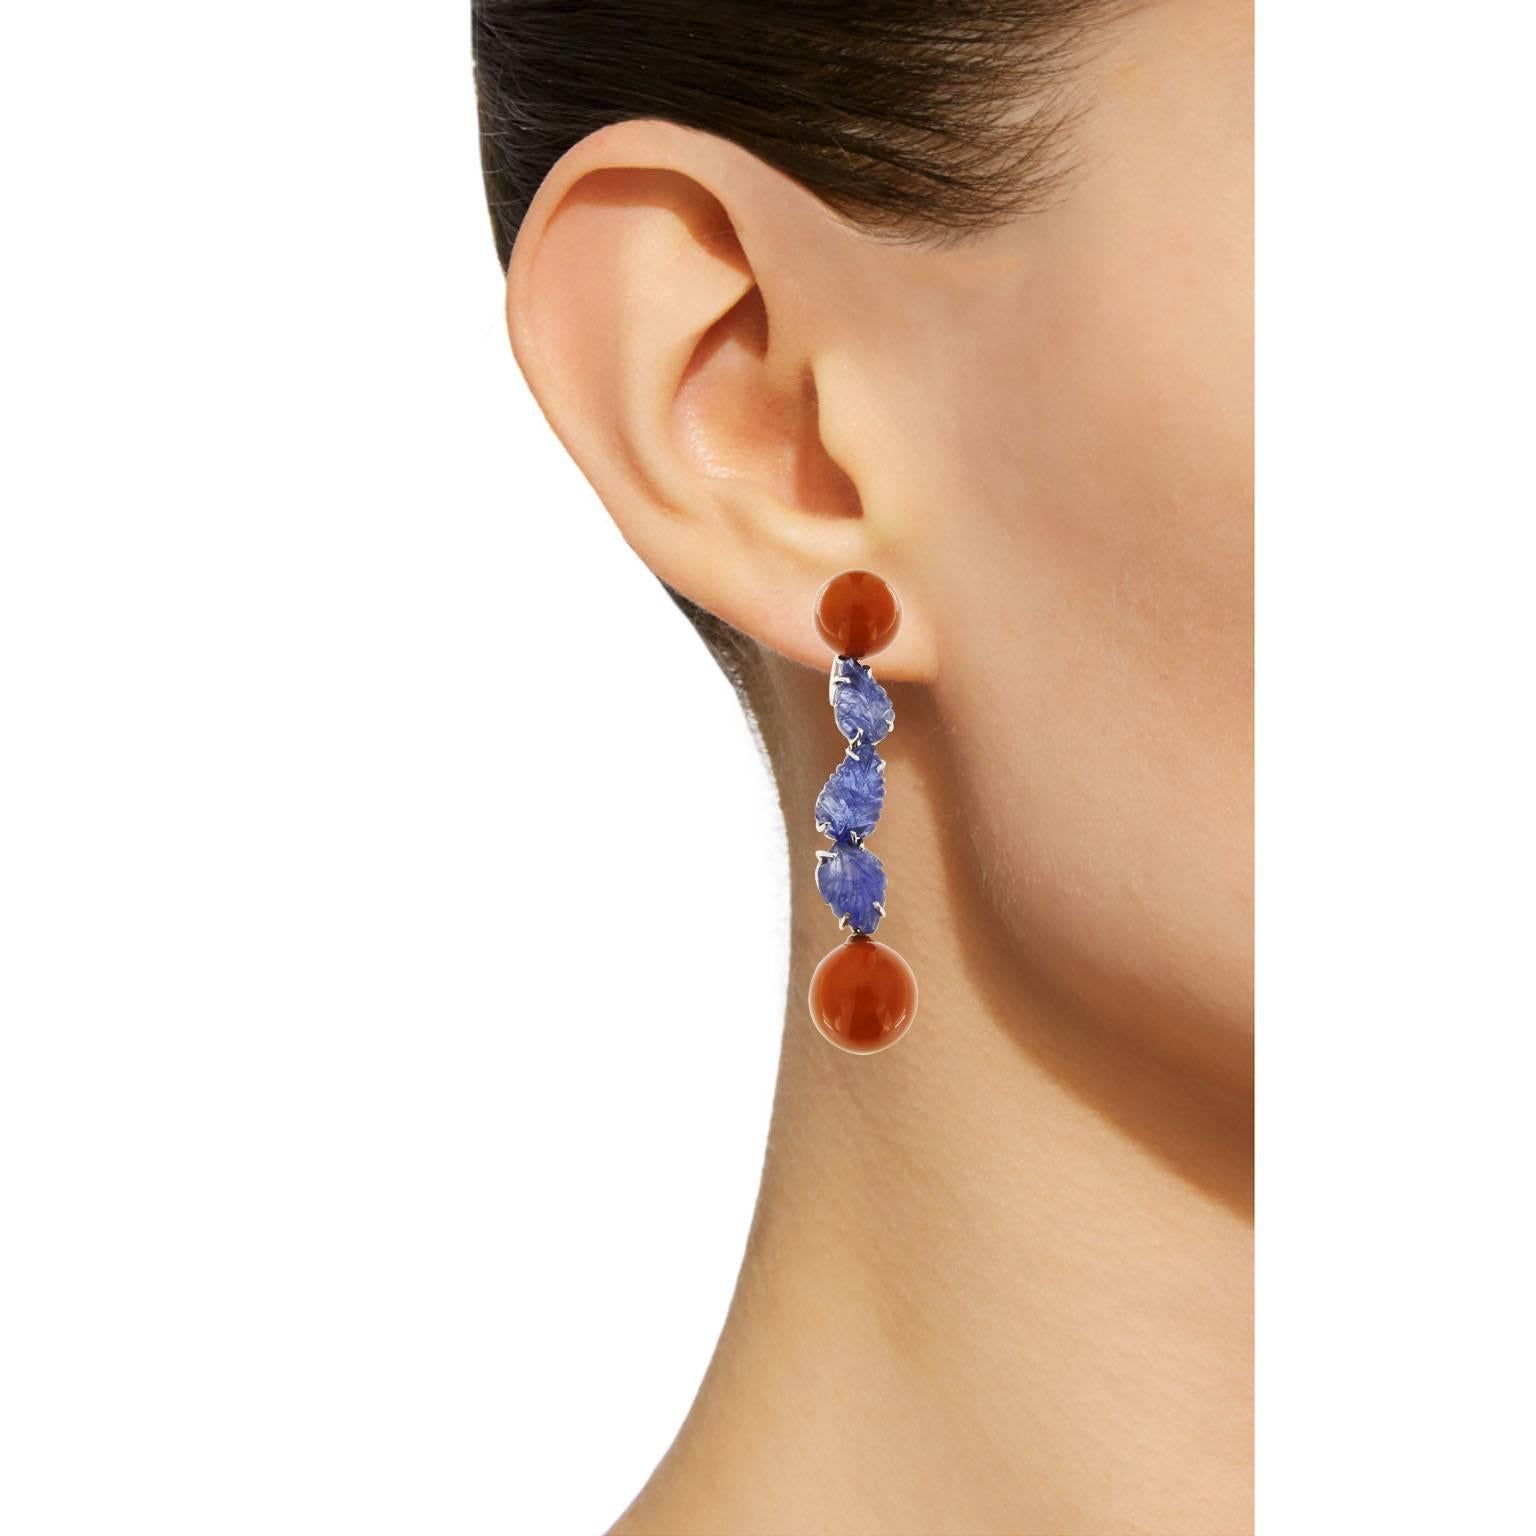 Jona design collection, hand crafted in Italy, 18 karat white gold dangle earrings set with four Mediterranean Coral spheres and six carved Blue Sapphire leaves. Dimensions: 2.28 in. H x 0.42 in. W x 0.55 in. D - 57 mm. H x 10 mm. W x 14 mm. D
All